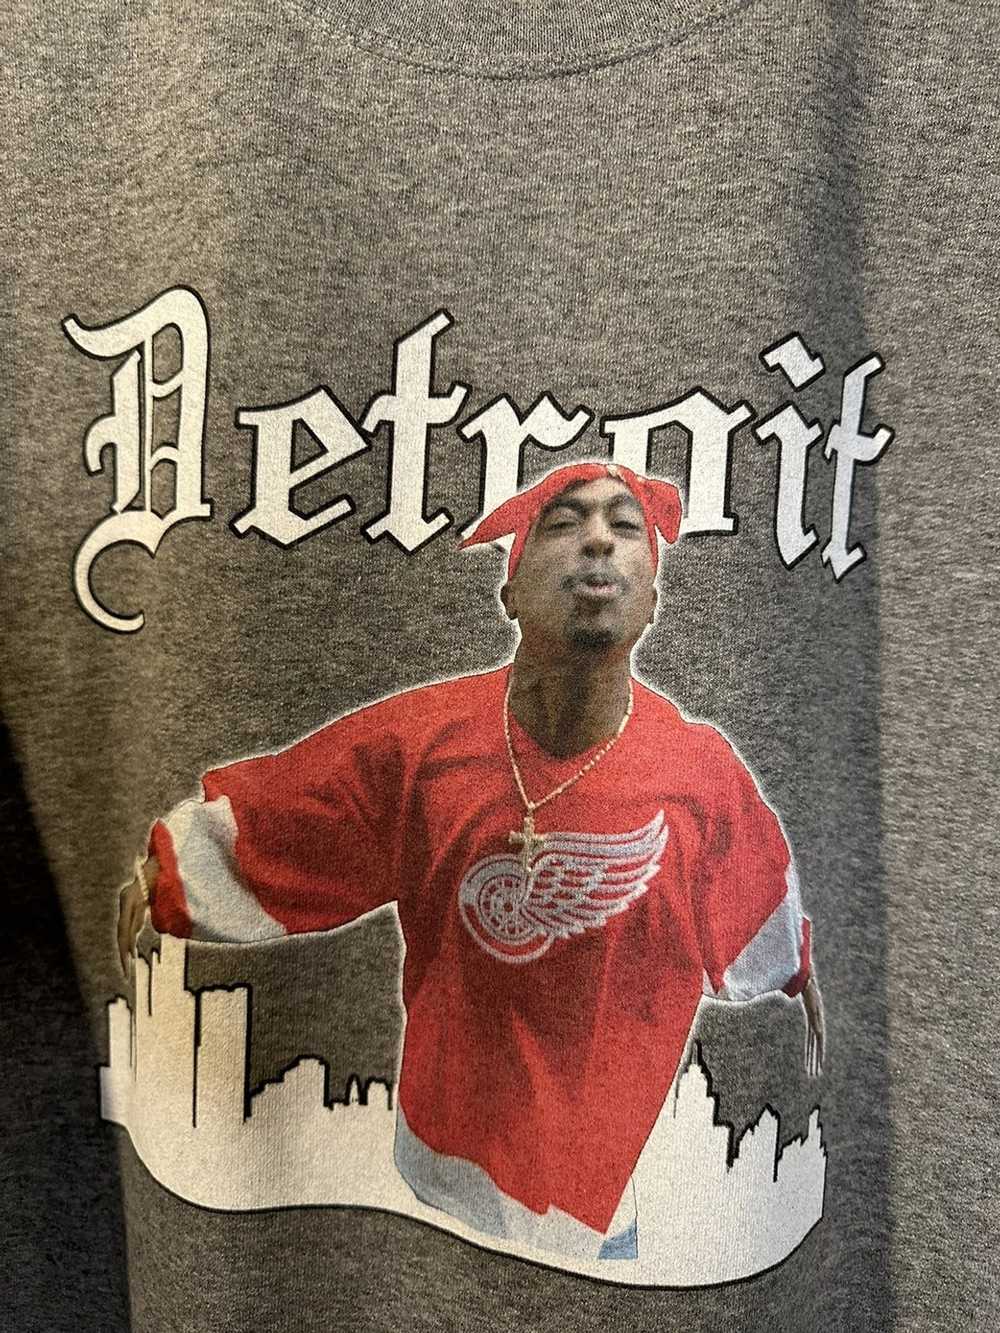 Ink Detroit - Tupac Back from the Dead - Wings Jersey - T-Shirt - Blac